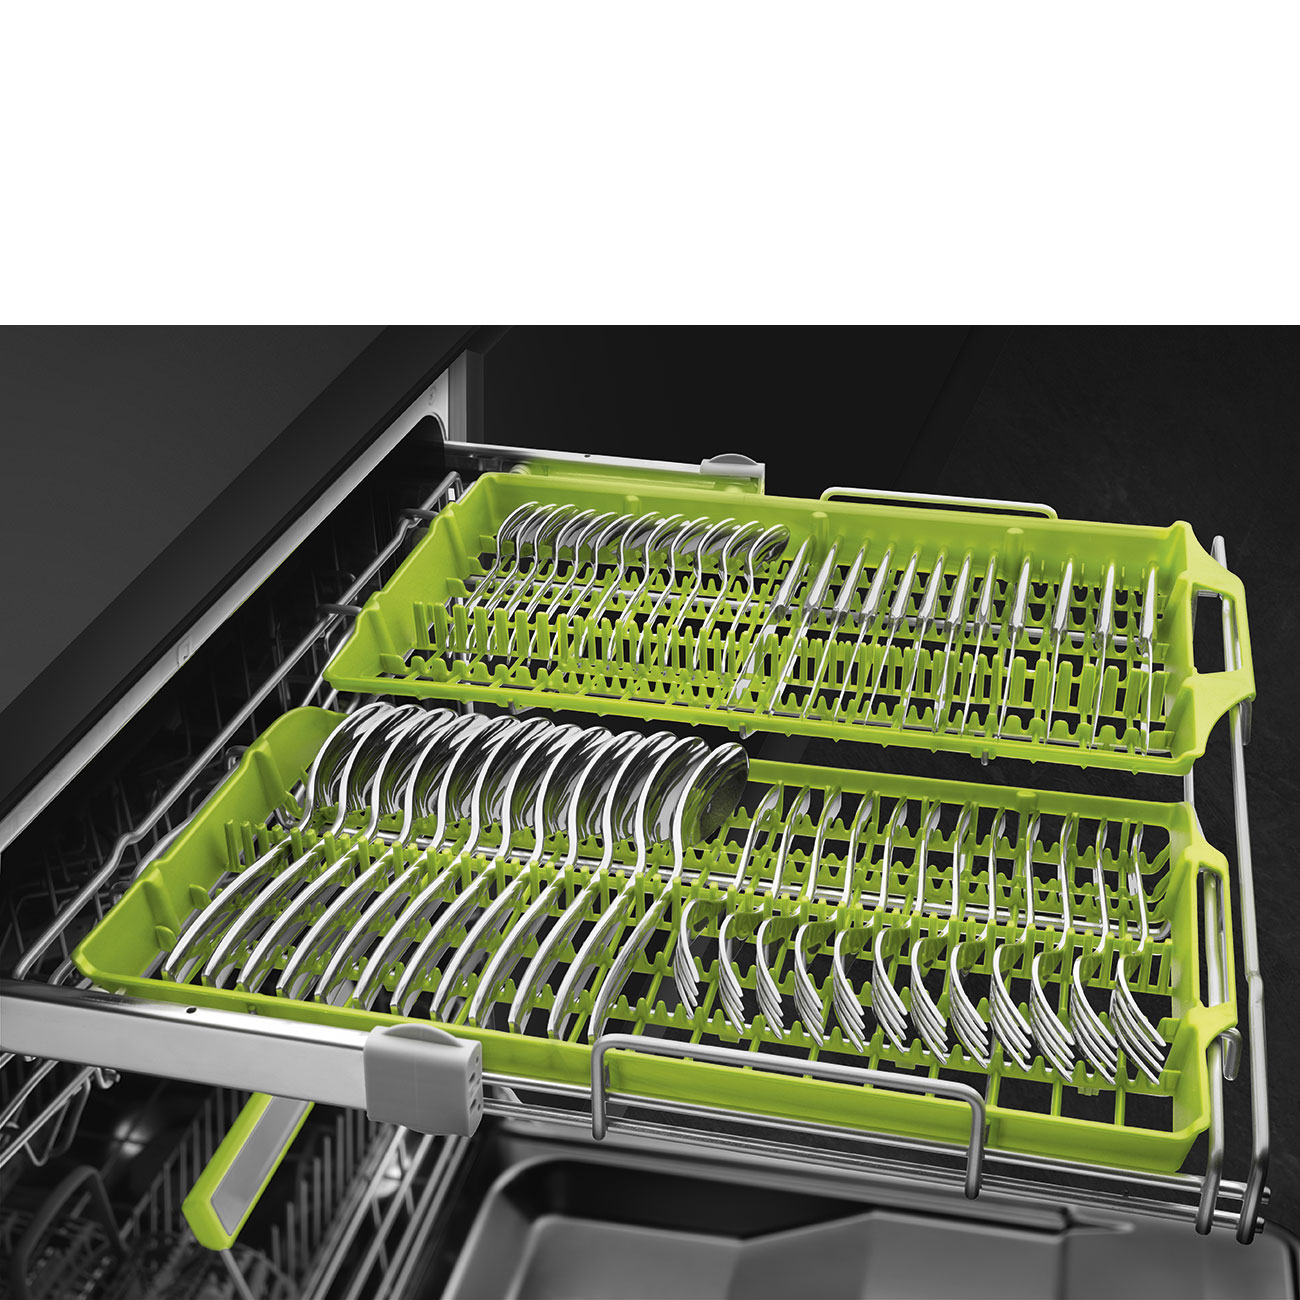 Partially-integrated built-in dishwasher 60 cm Smeg_9